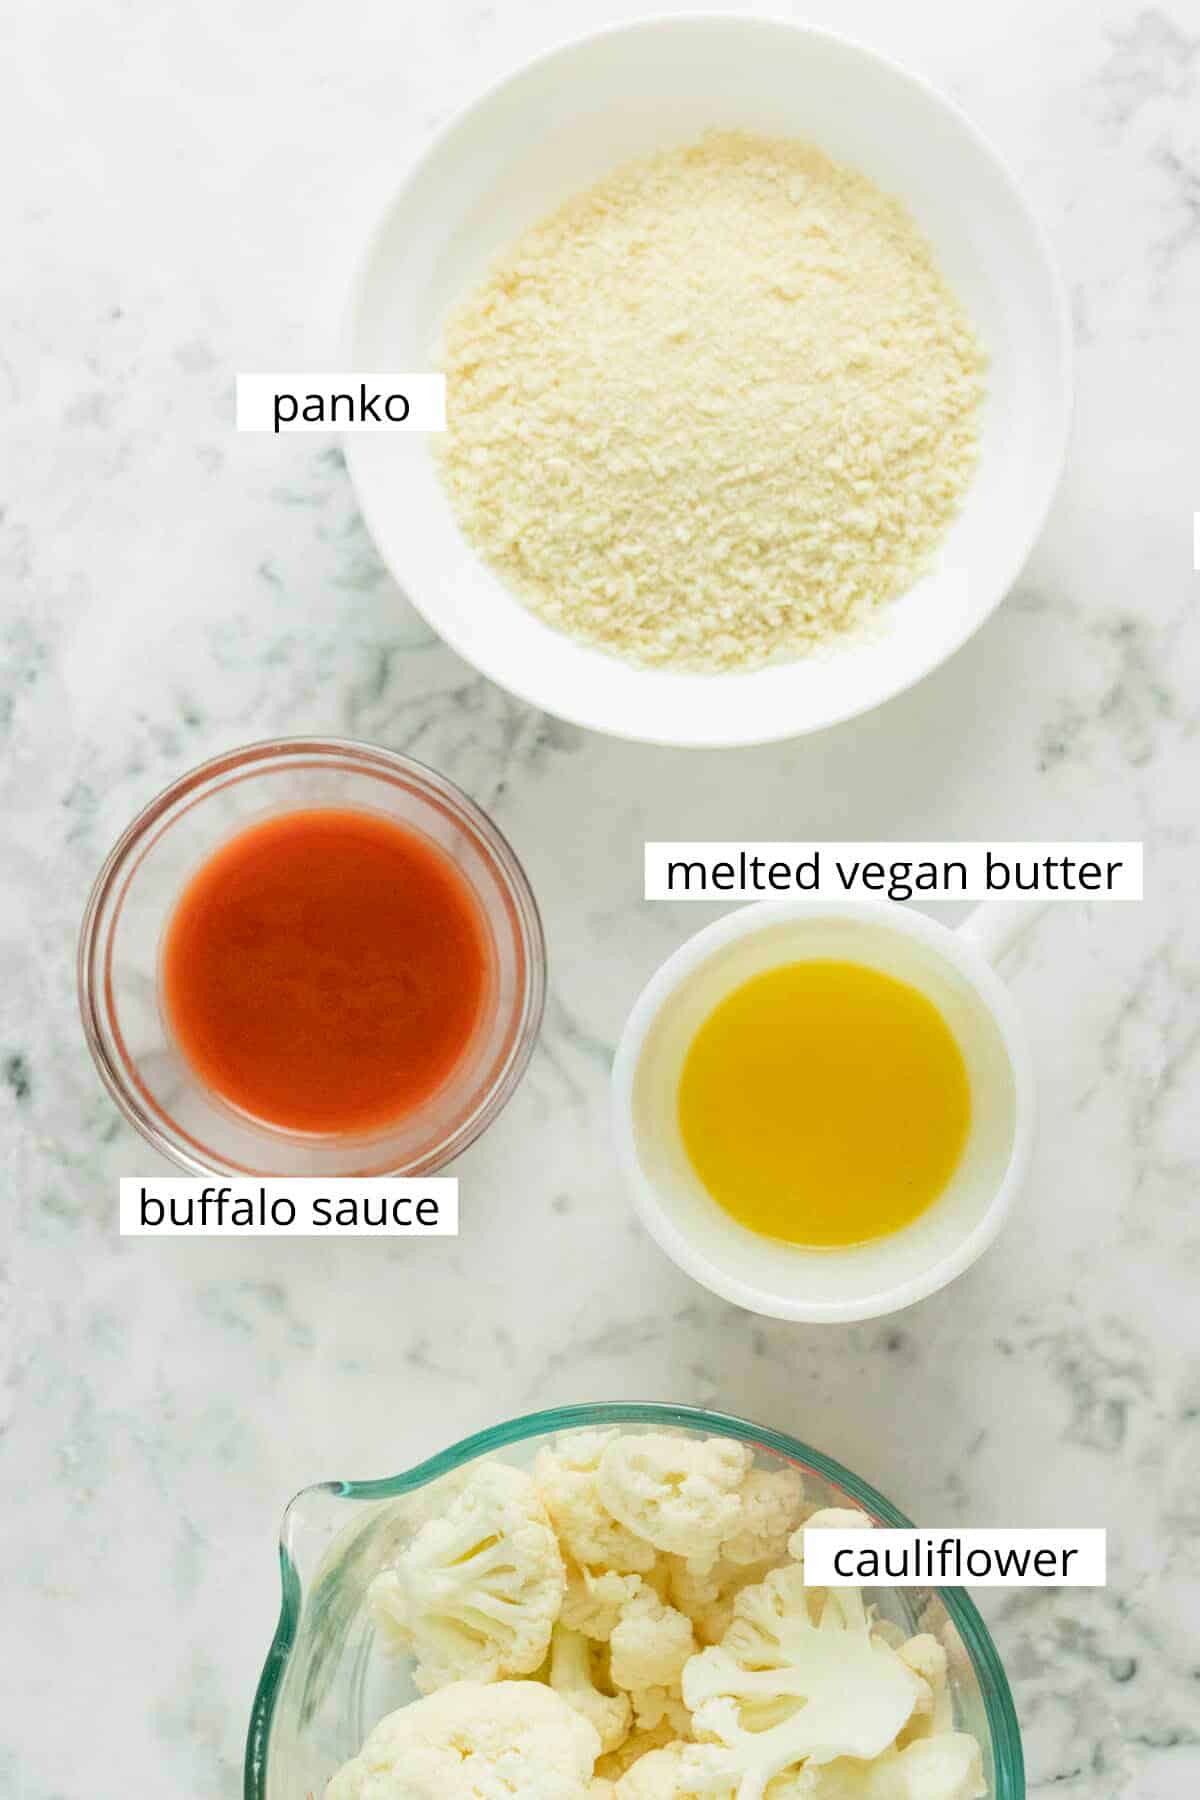 panko, buffalo sauce, vegan butter, and cauliflower florets in bowls on a marble table. All labeled with text